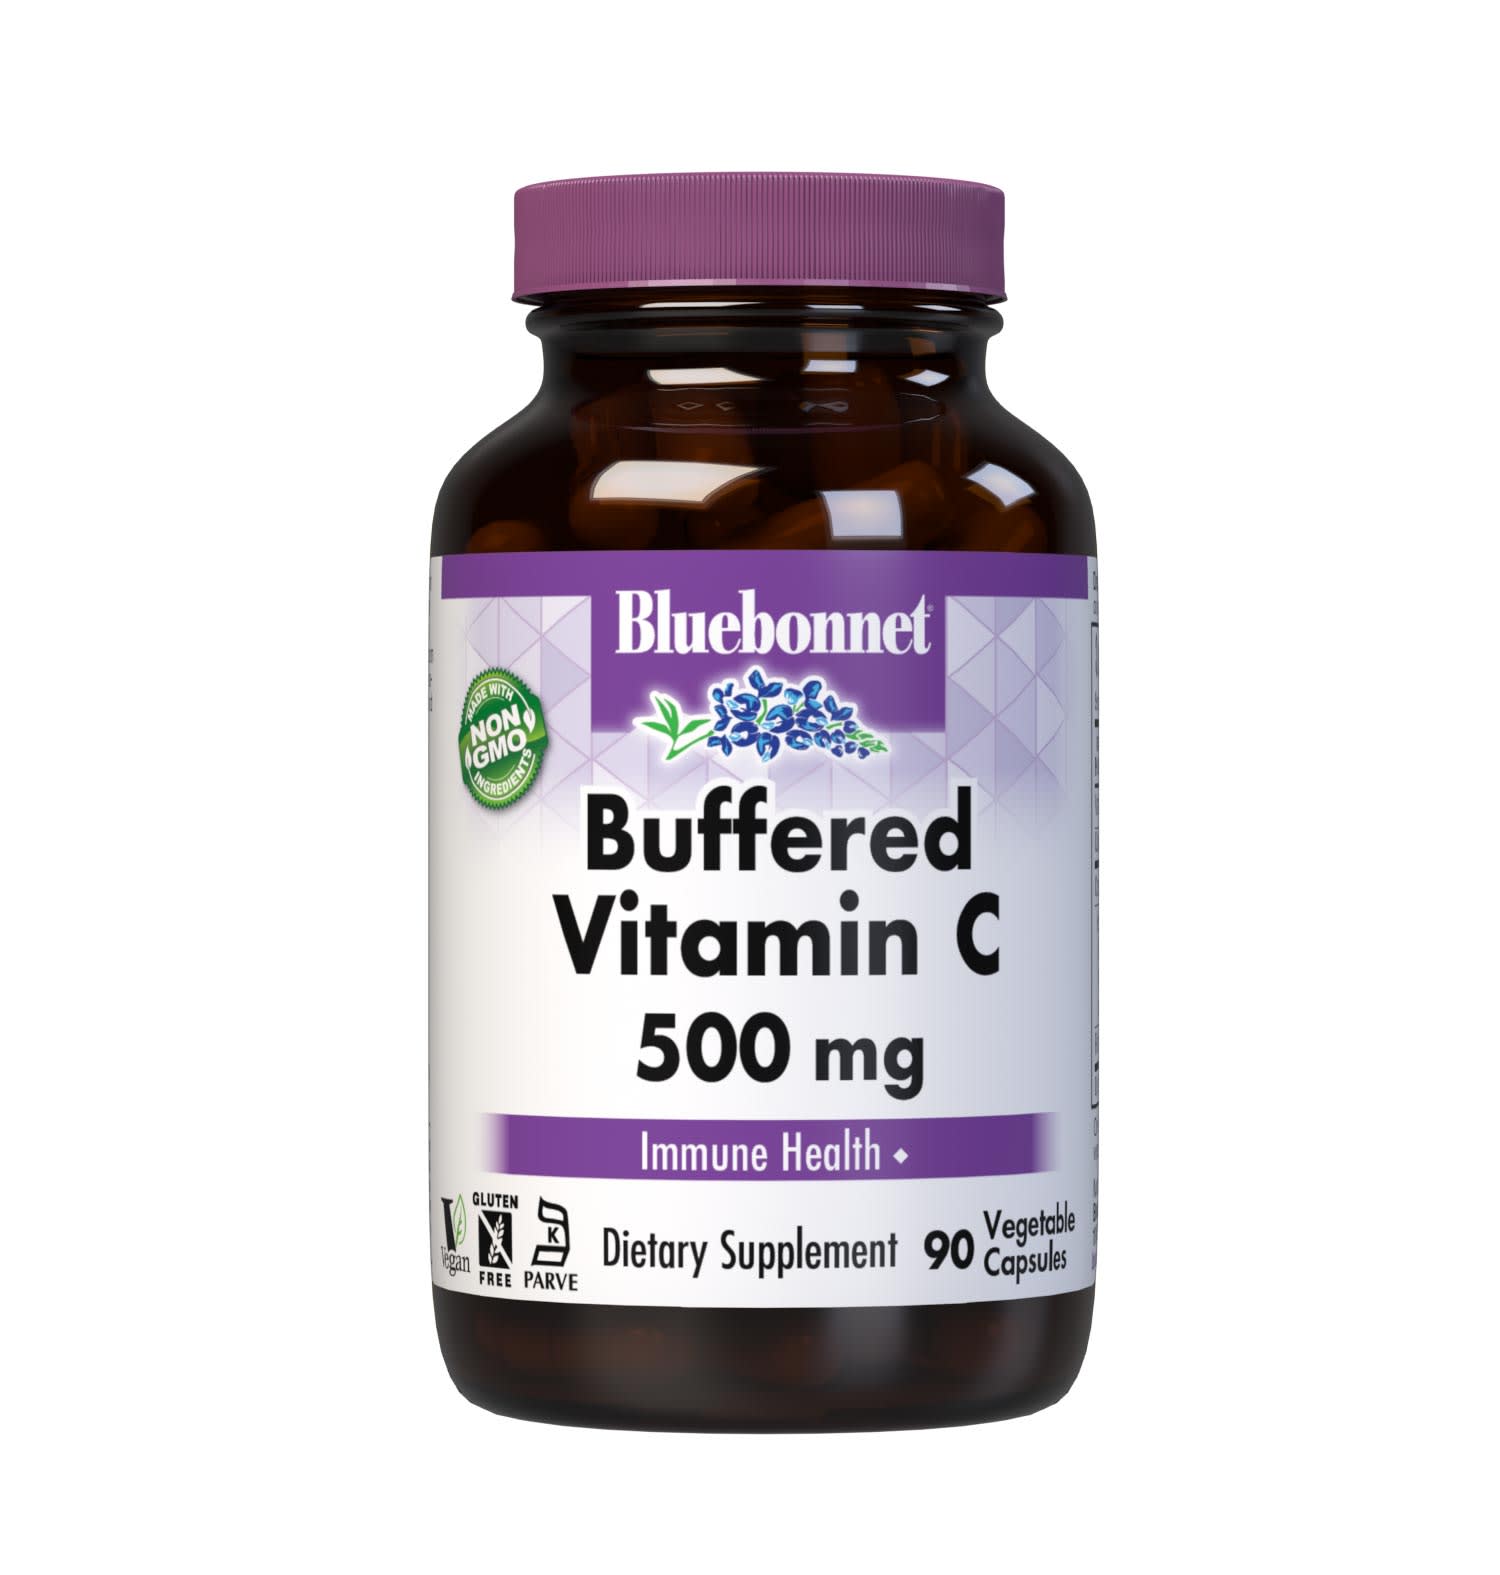 Bluebonnet’s Buffered Vitamin C-500 mg 90 Vegetable Capsules are formulated with non-GMO identity-preserved (IP) vitamin C from calcium ascorbate, along with citrus bioflavonoids from oranges, lemons, tangerines, grapefruit and limes as well as hesperidin and rutin to help support immune function. #size_90 count